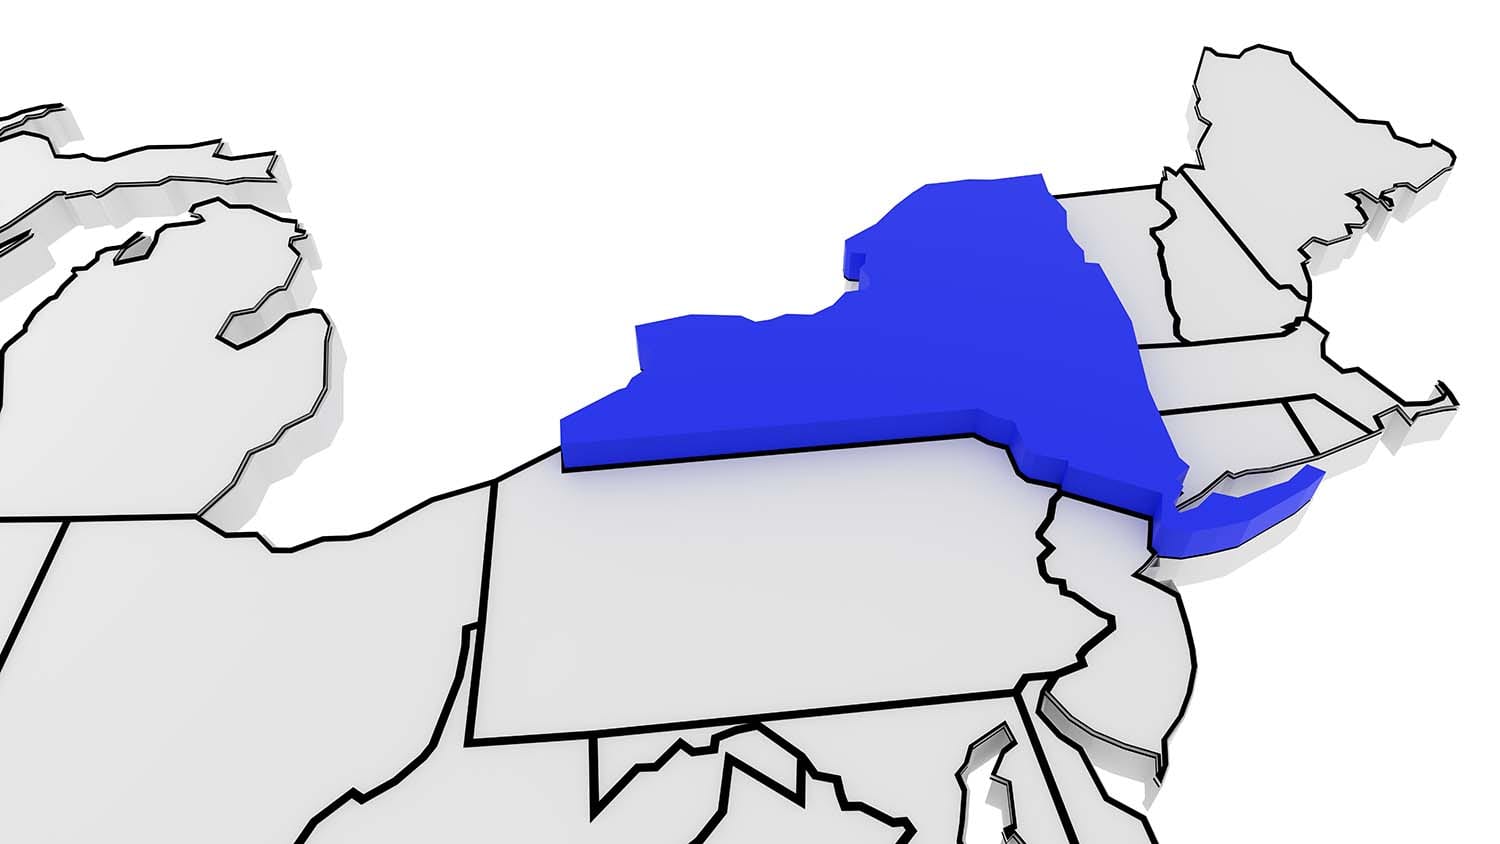 Blue New York state map for malpractice requirements